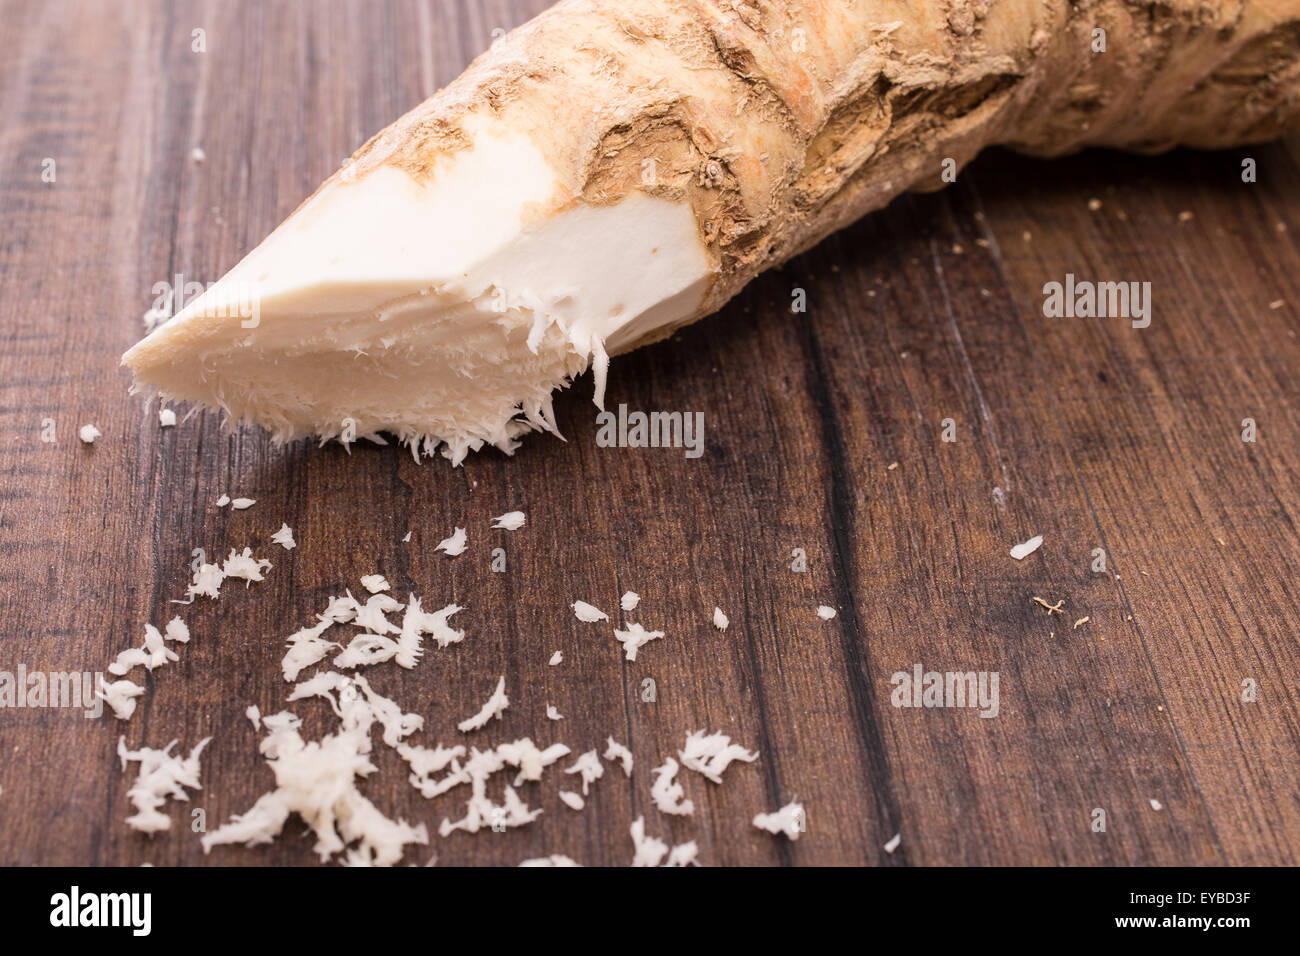 Grated raw horse radish on a wooden table Stock Photo